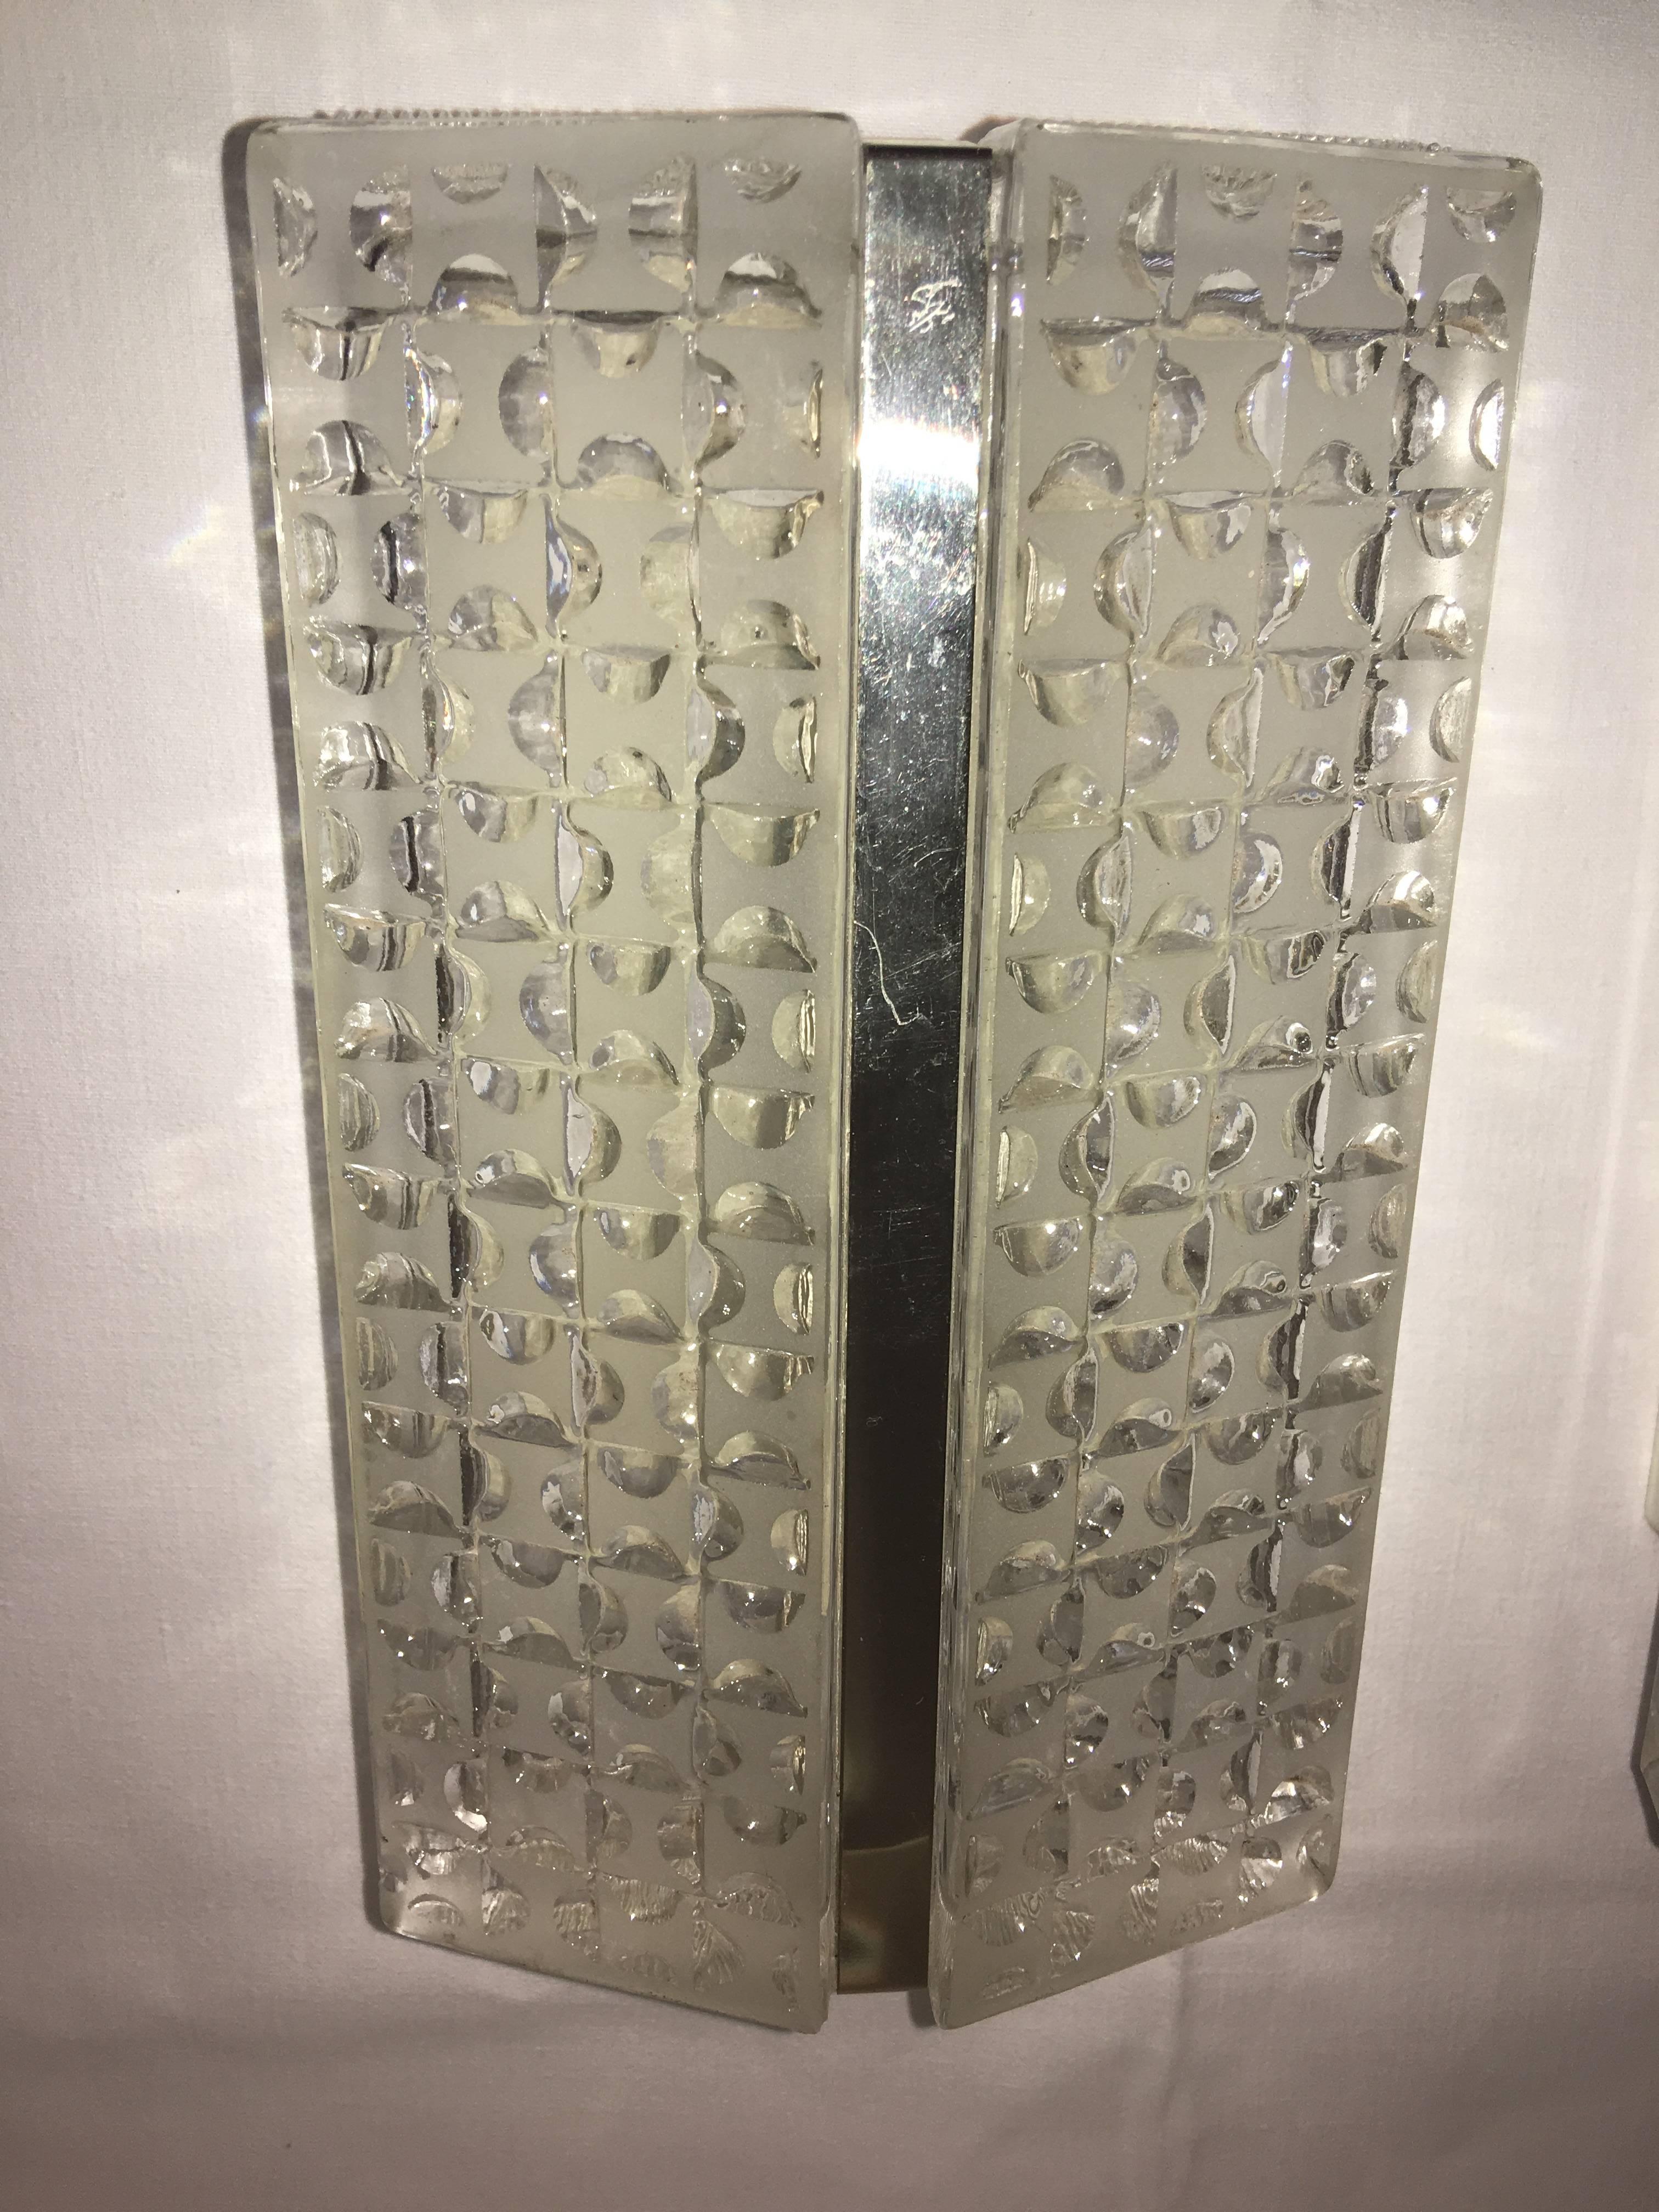 A pair of textured glass sconces with a chrome strip in the middle. Each fixture requires one European E14 candelabra bulb, each bulb up to 40 watts.